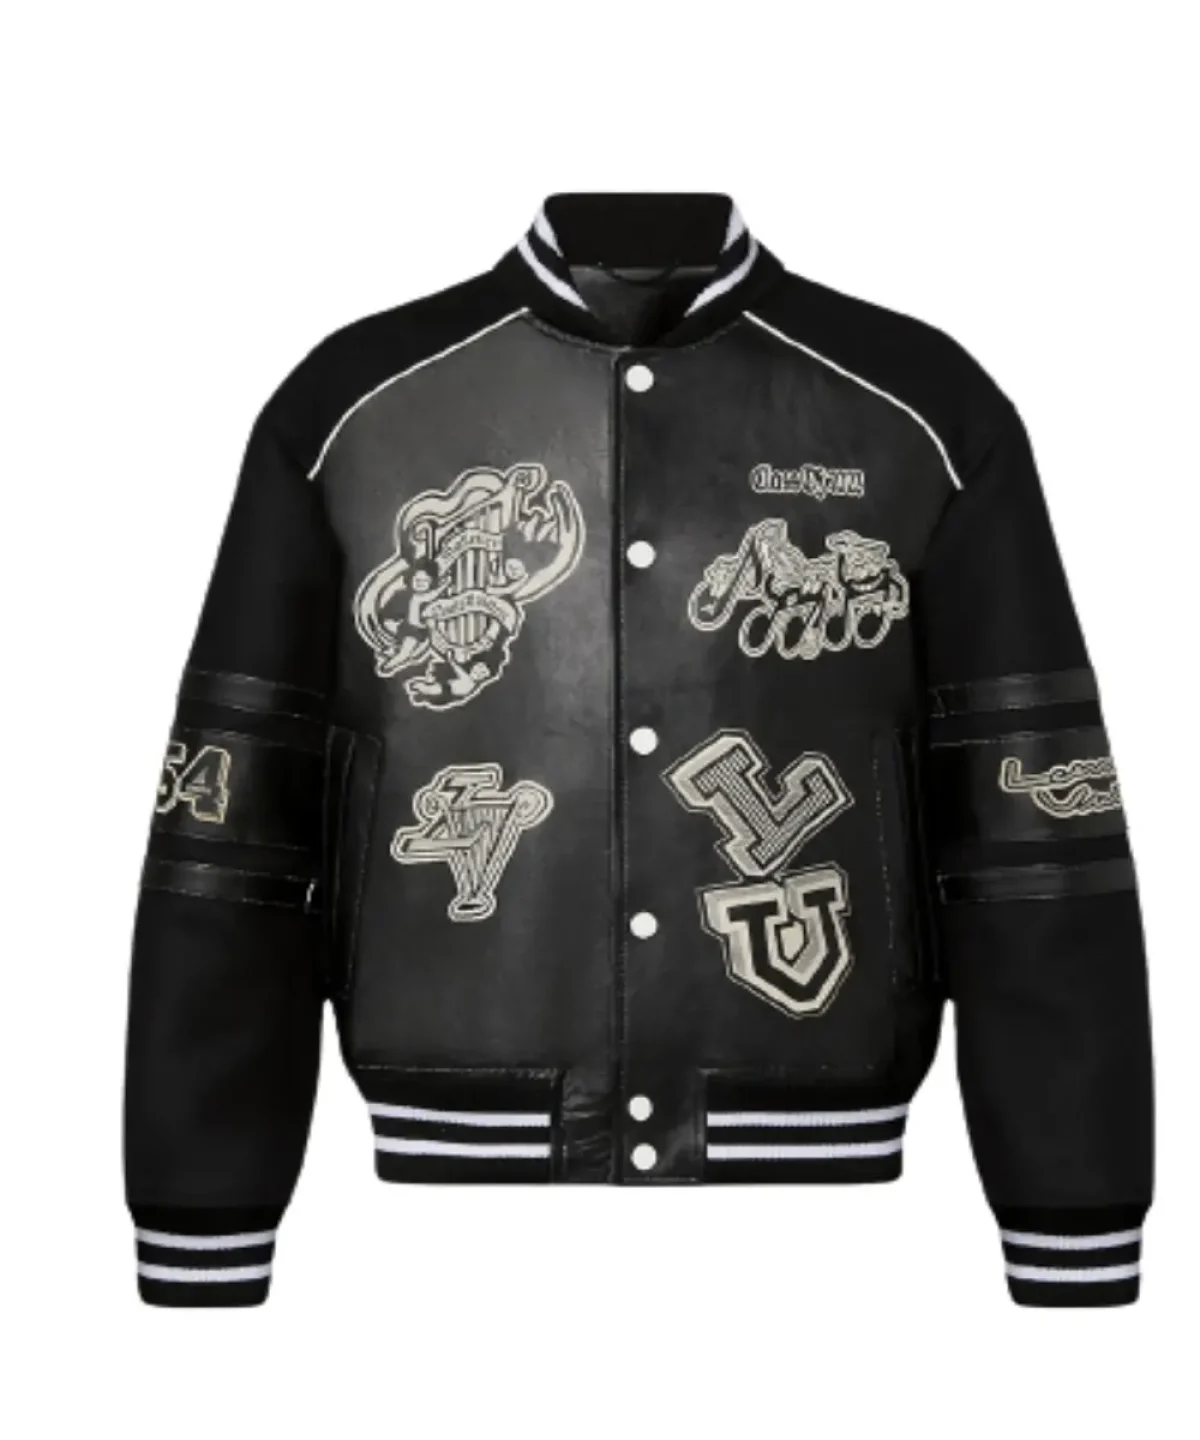 Hearts in The Game Marco Grazzini Varsity Jacket